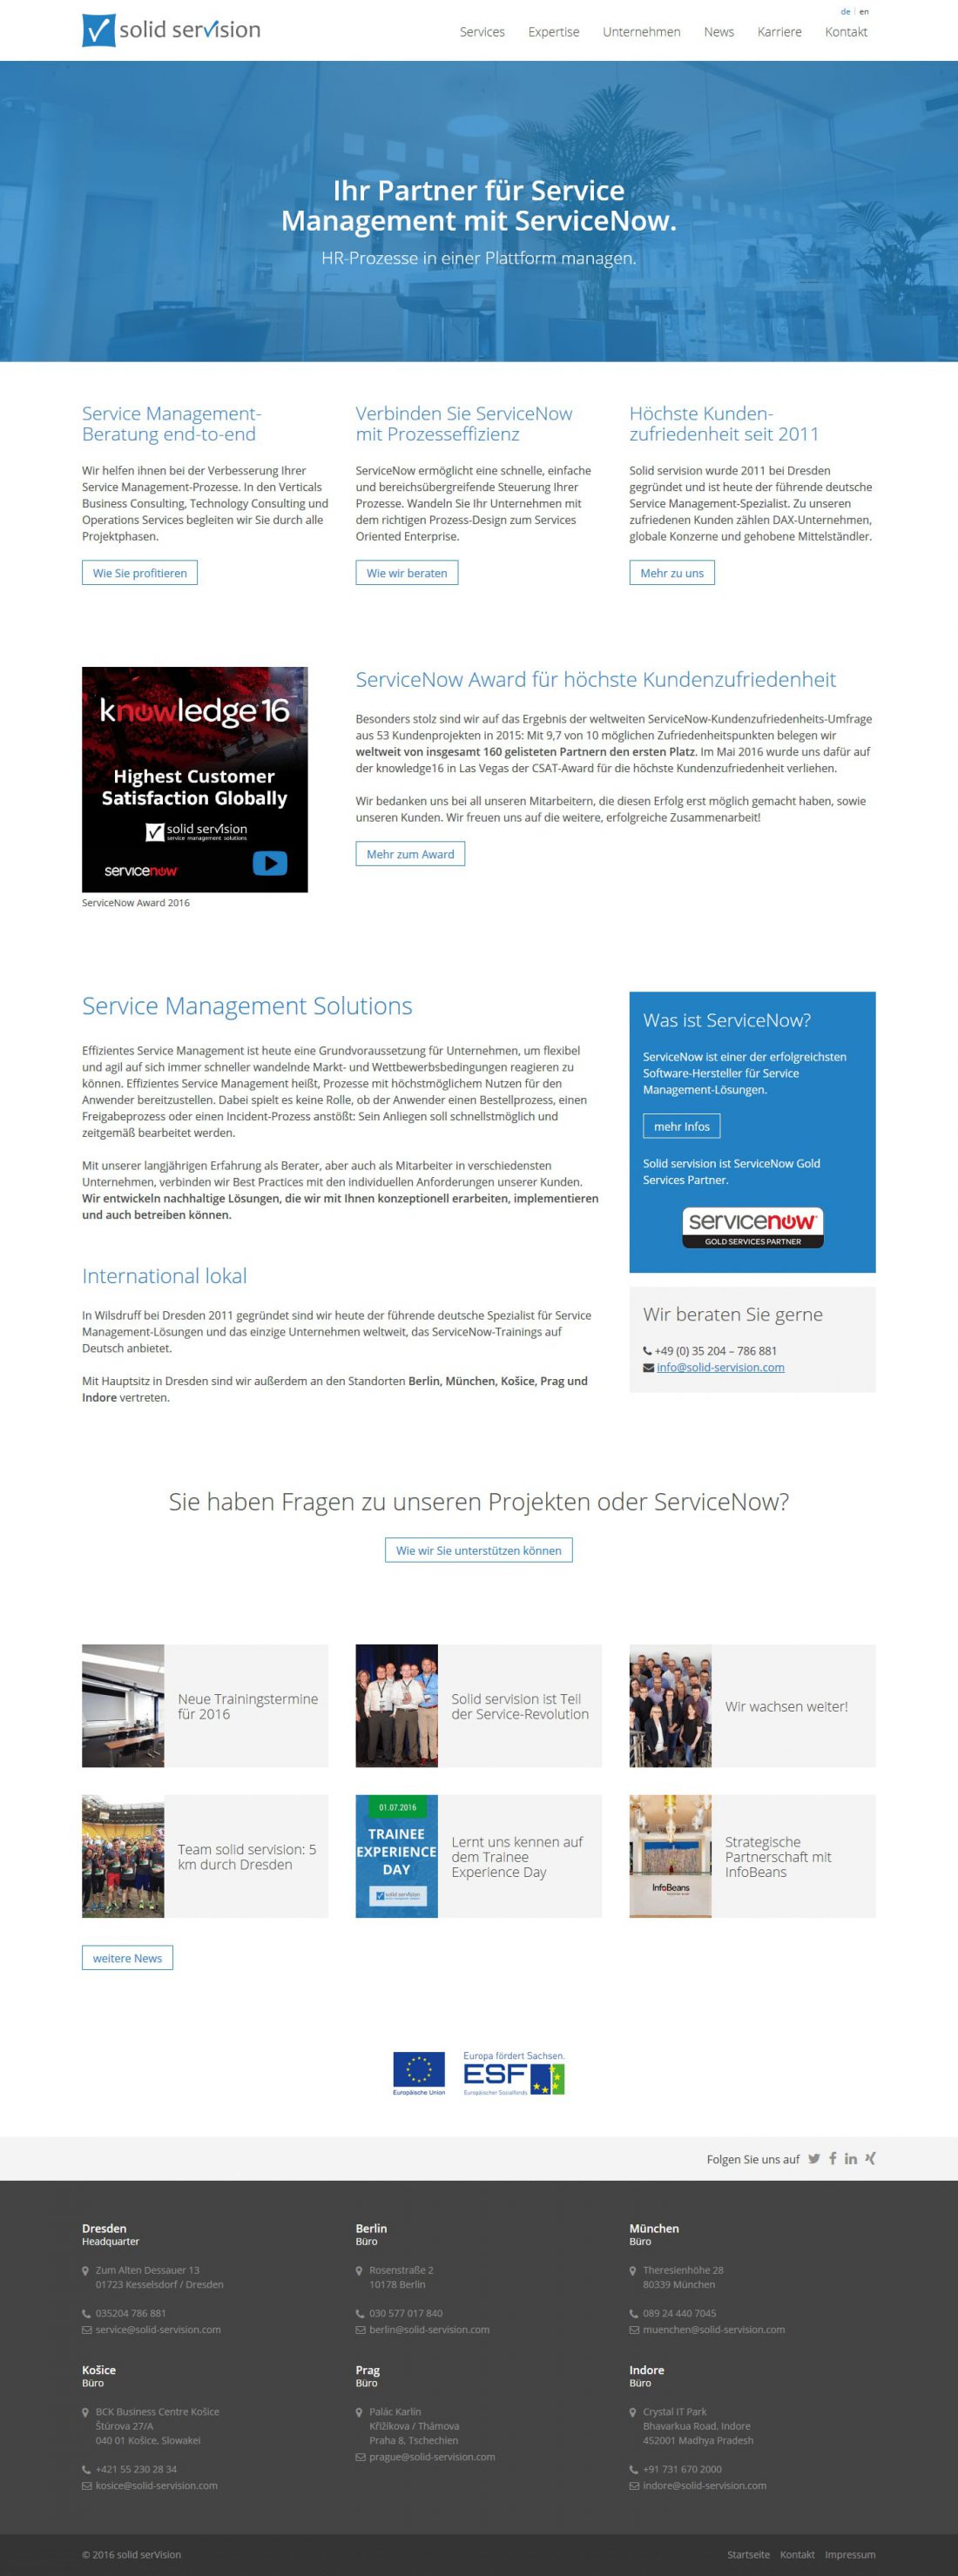 Screenshot Webseite Solid servision